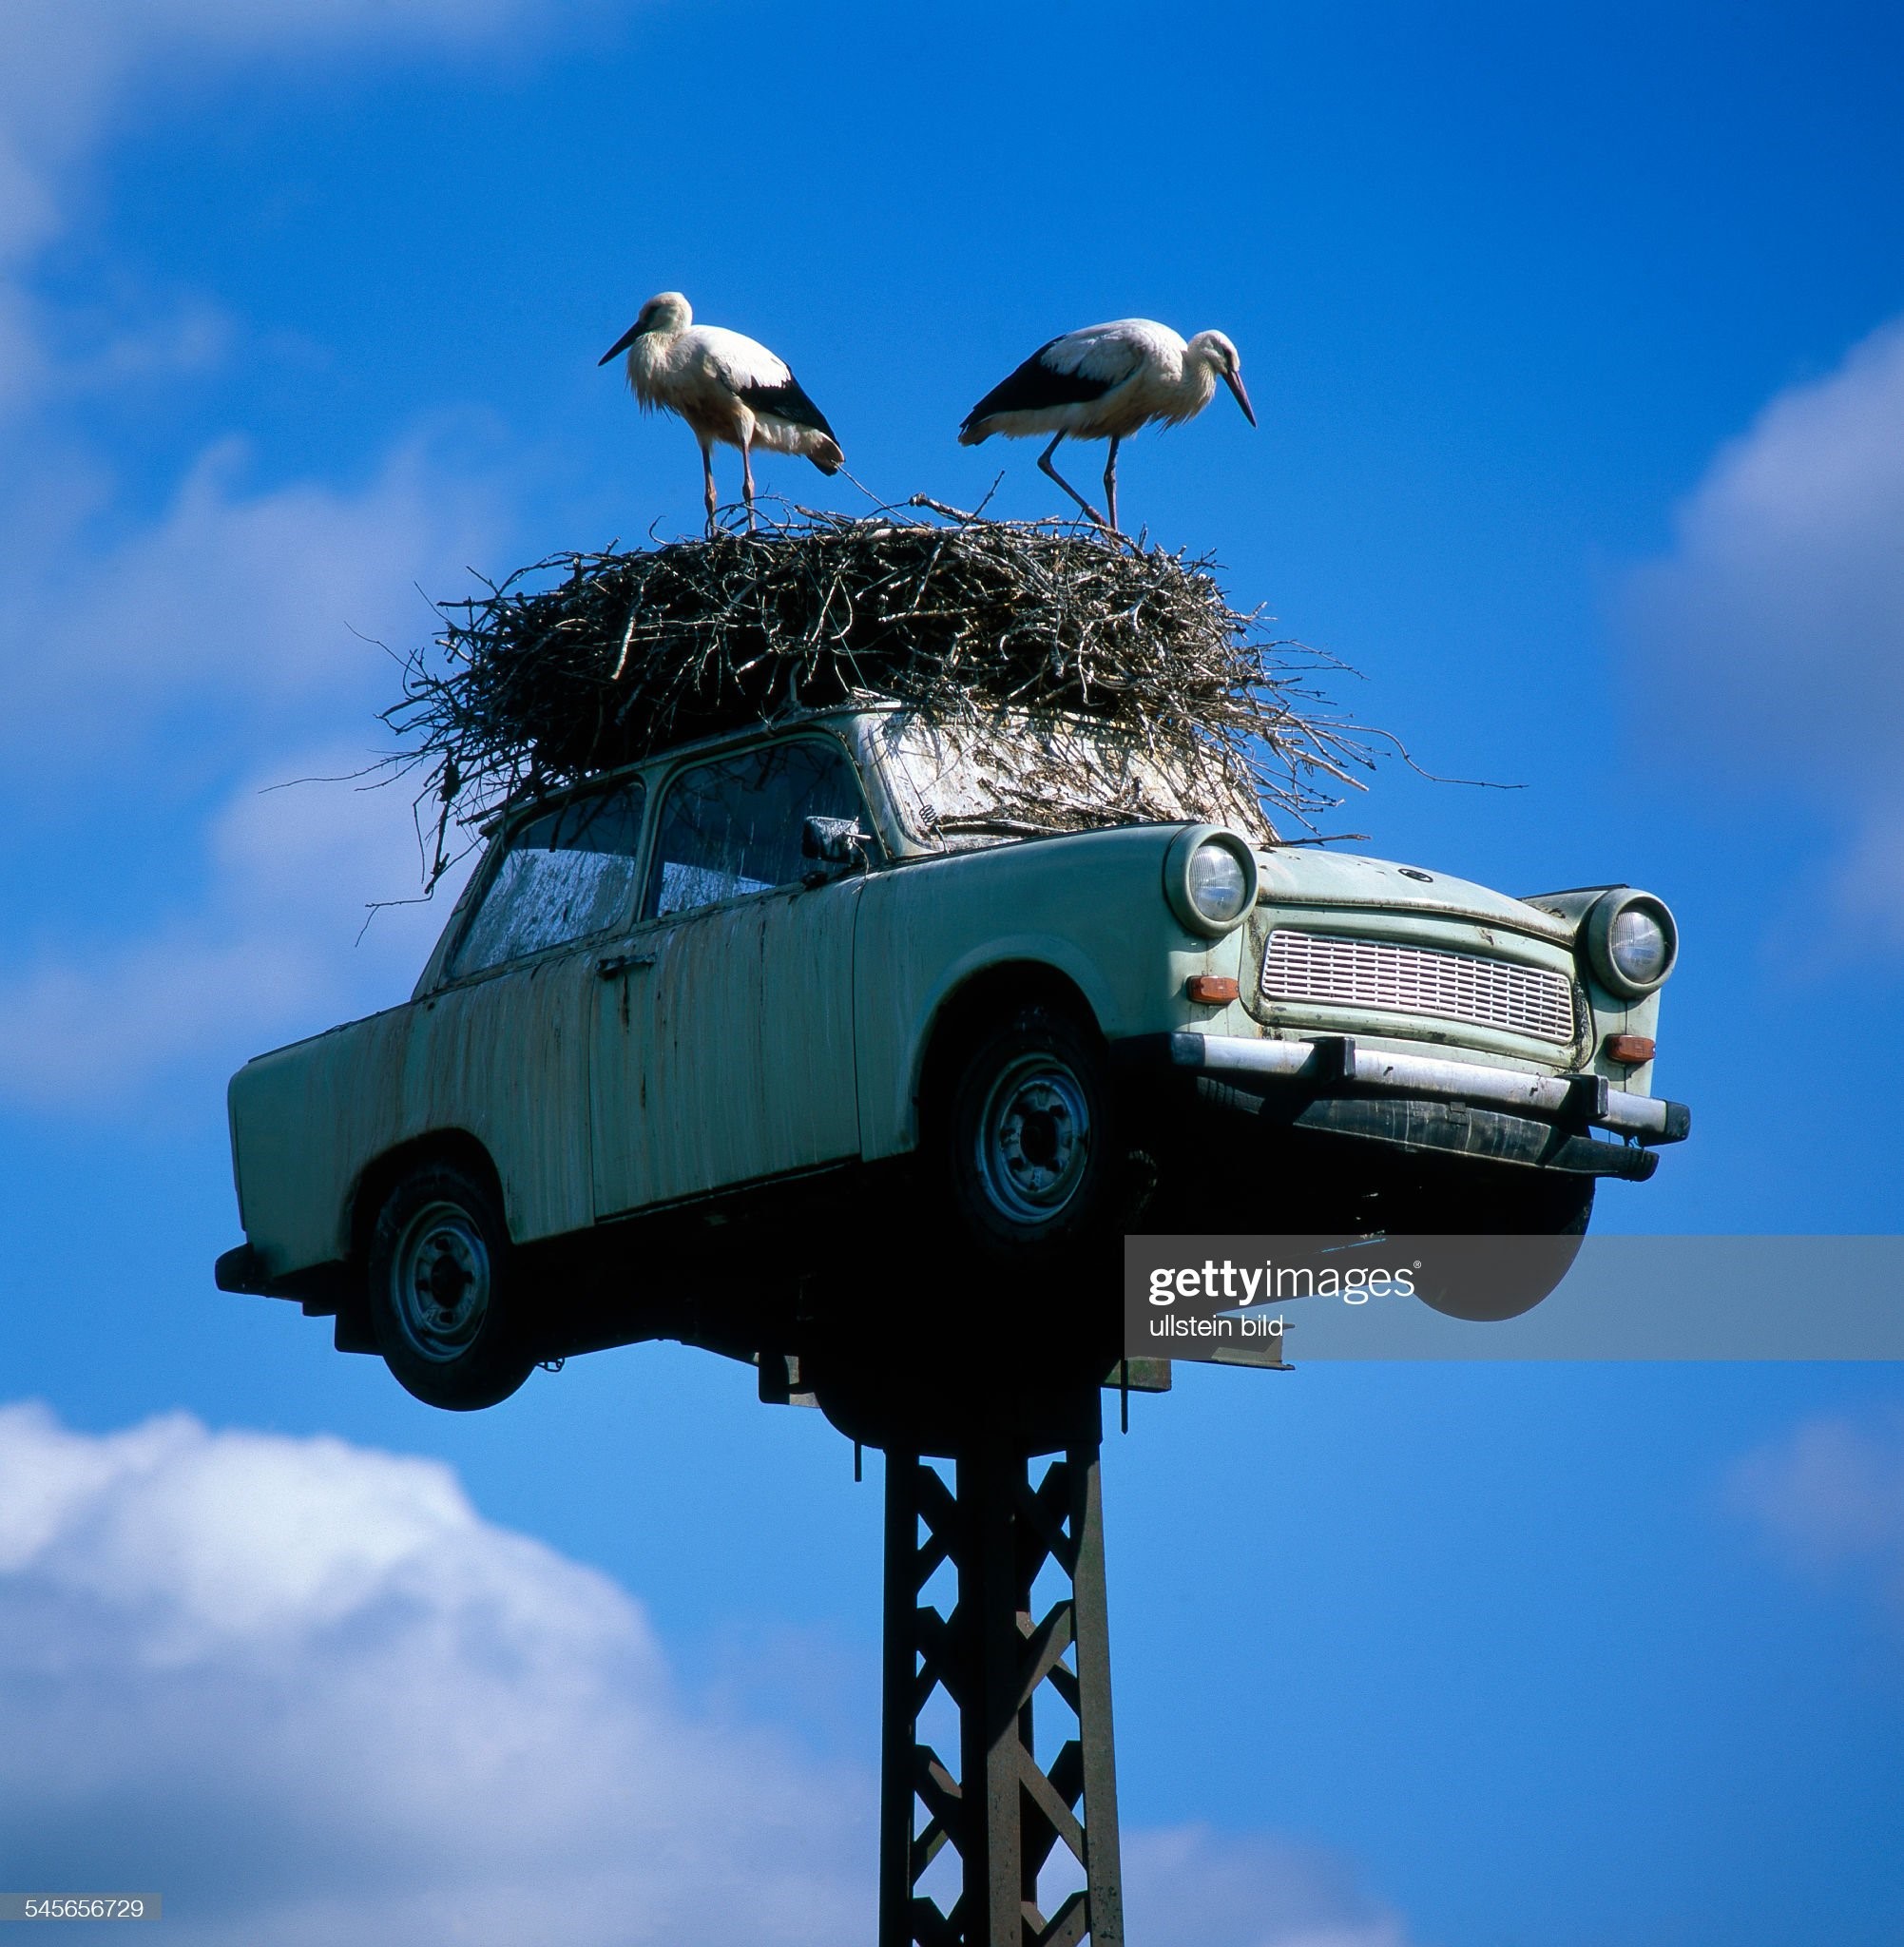 Germany, Neuruppin: storks in their nest on an old car ‘Trabant’.